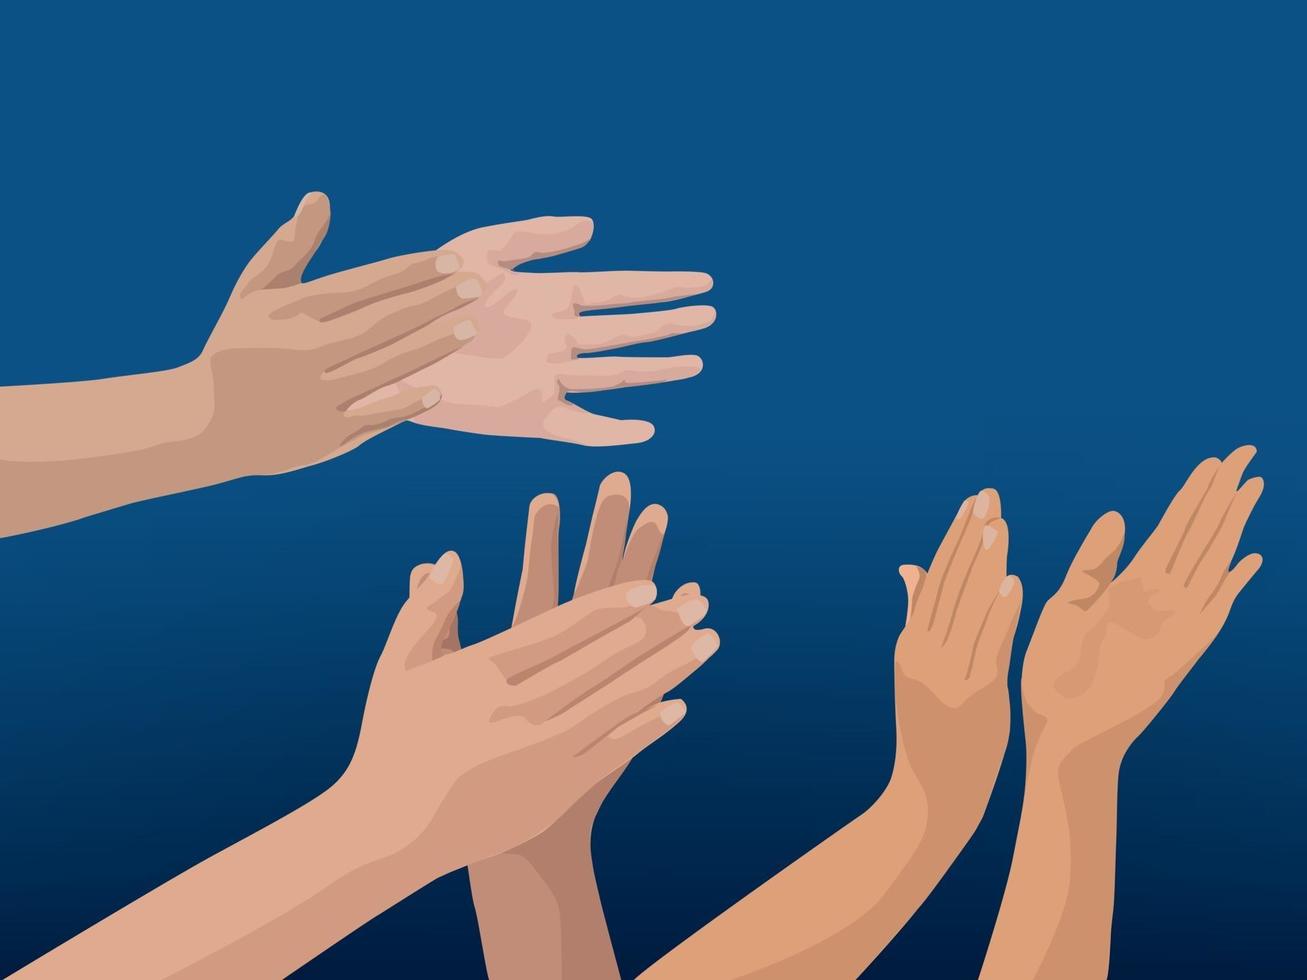 Clapping Hands on illustration graphic vector